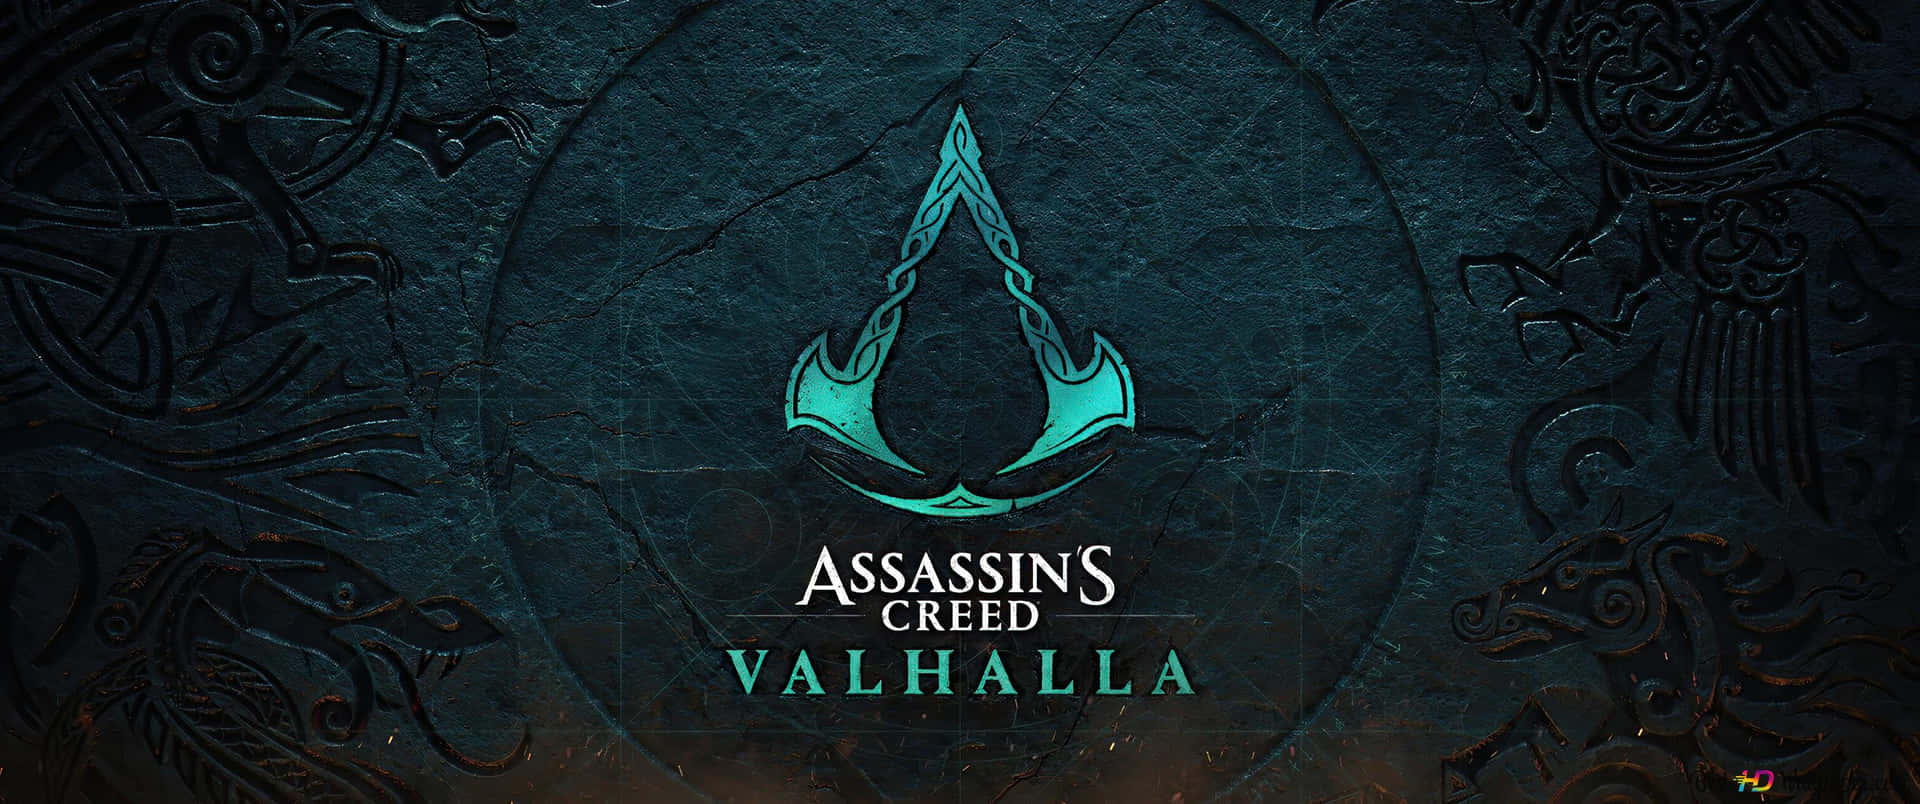 3440x1440p Assassin's Creed Odyssey Background Assassins' Creed Valhalla Green Logo Background